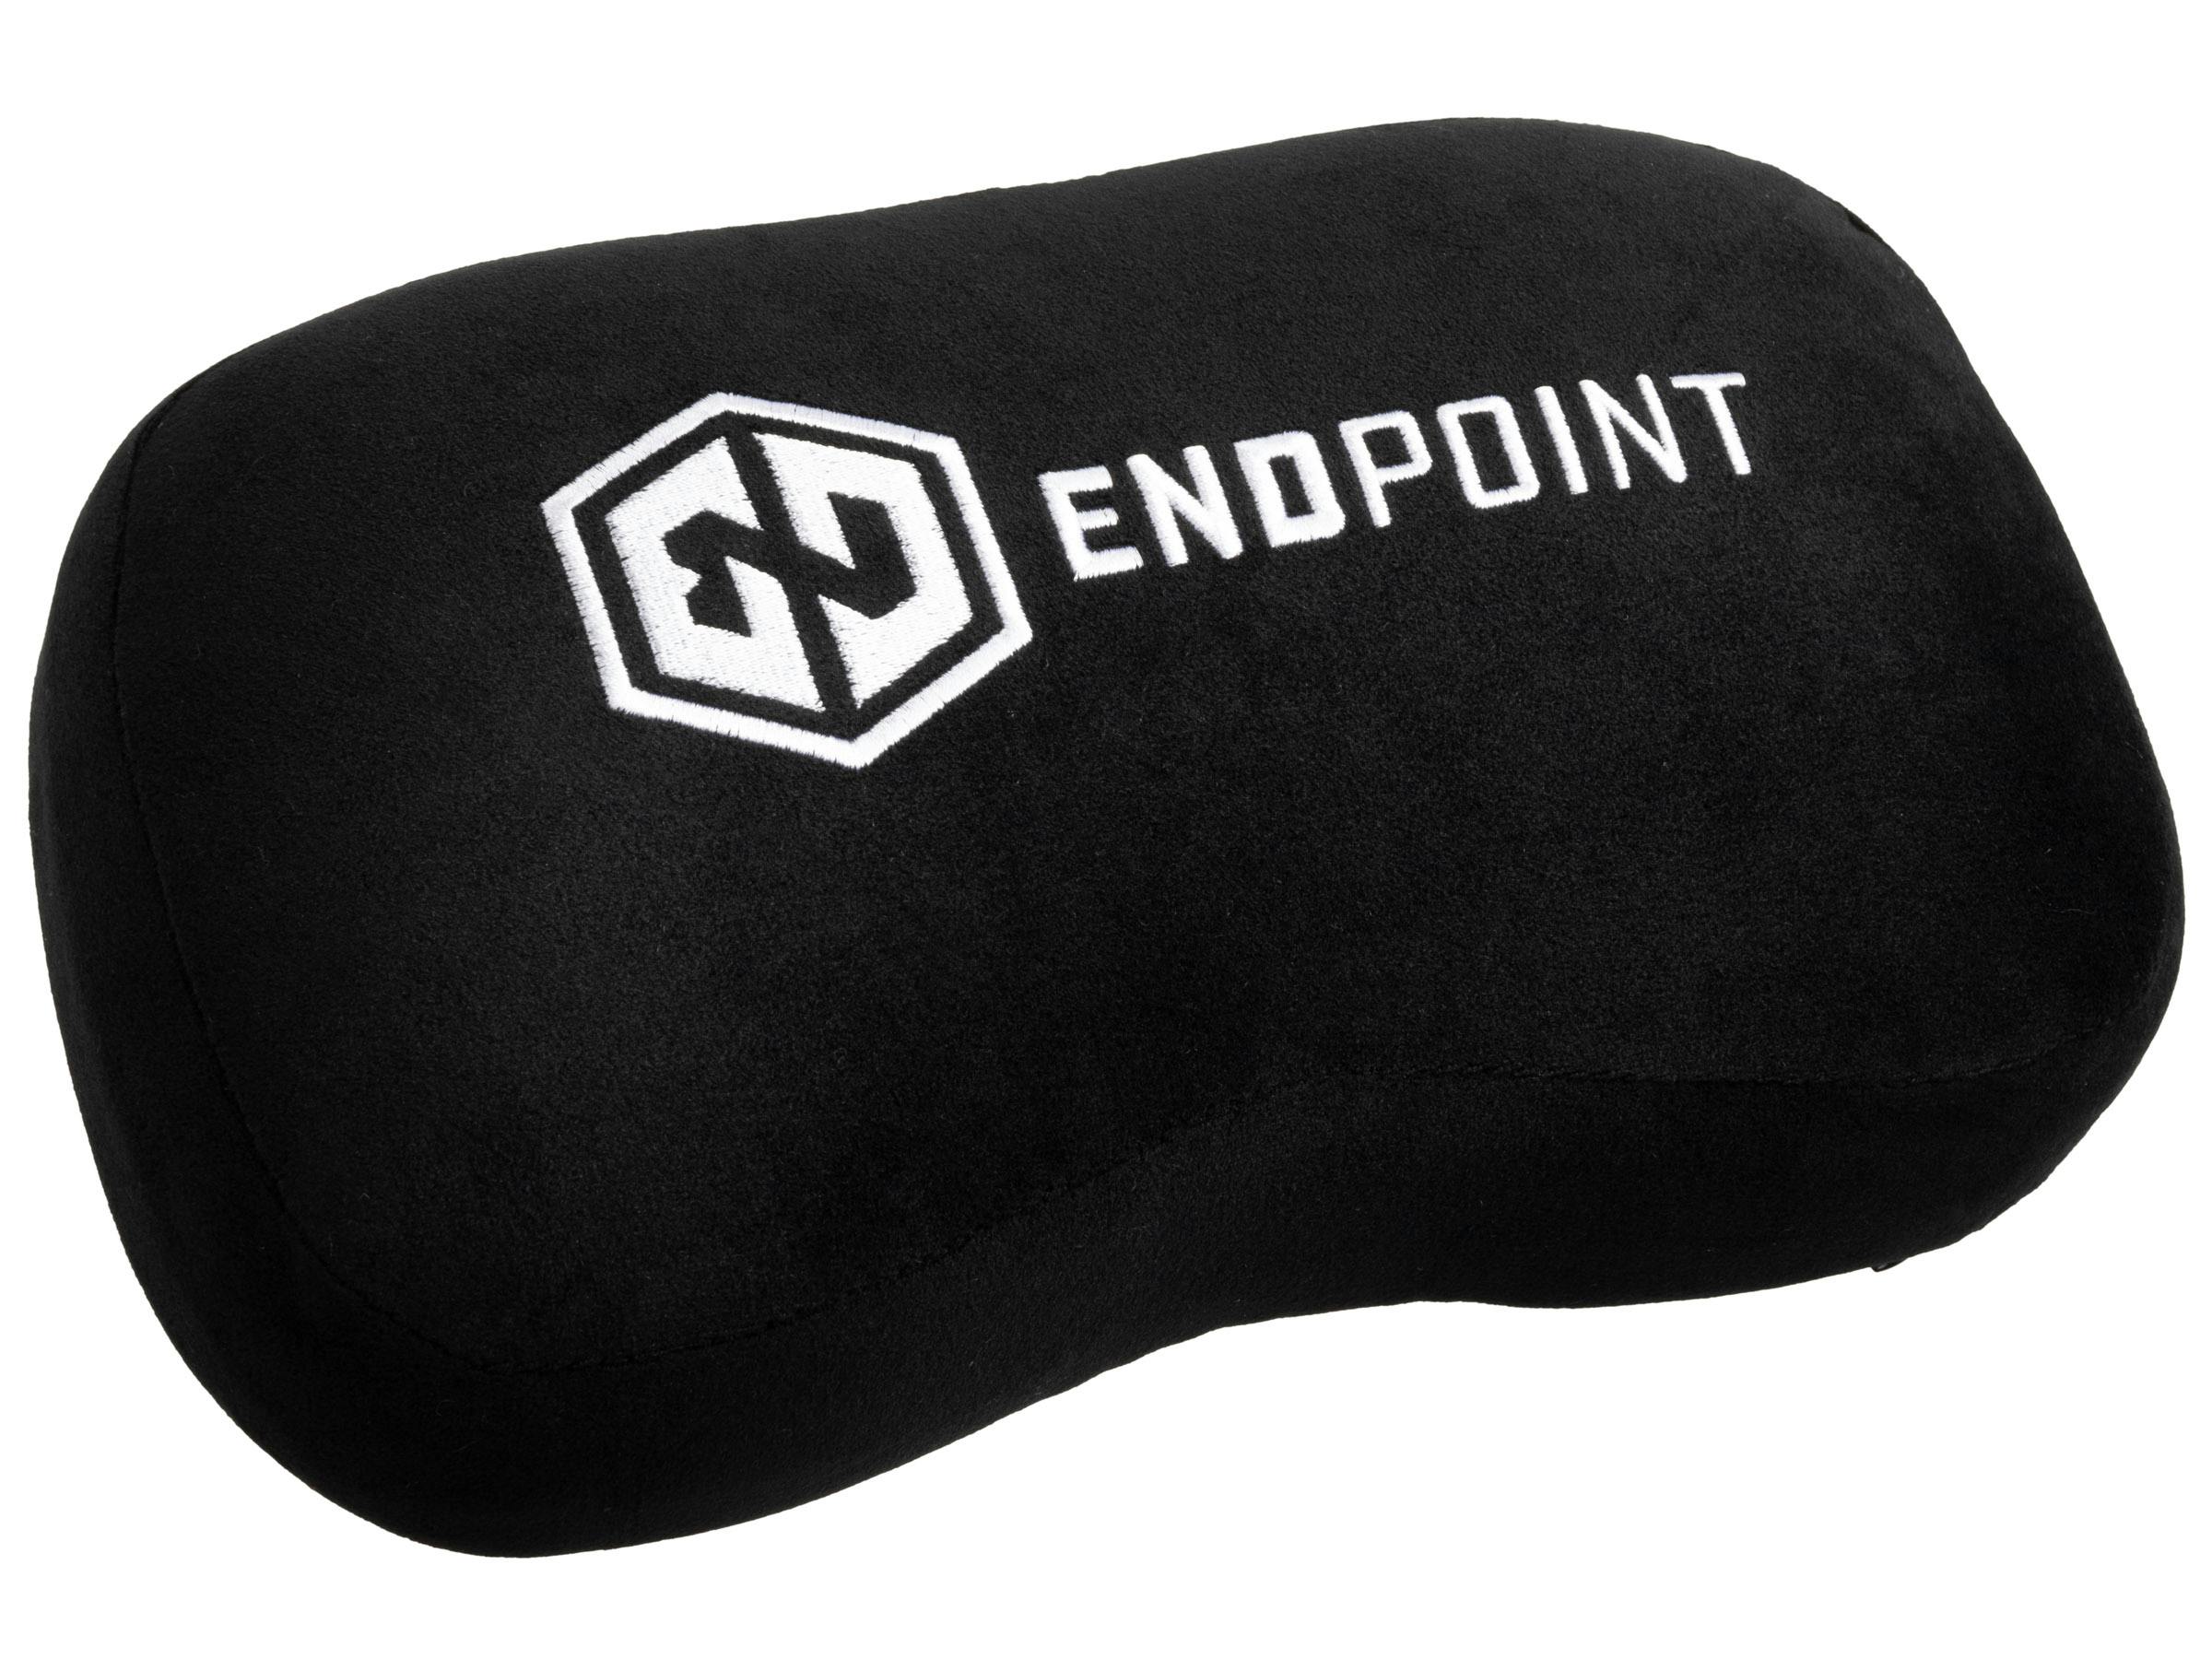 Noblechairs - Memory Foam Cushion - Endpoint Edition